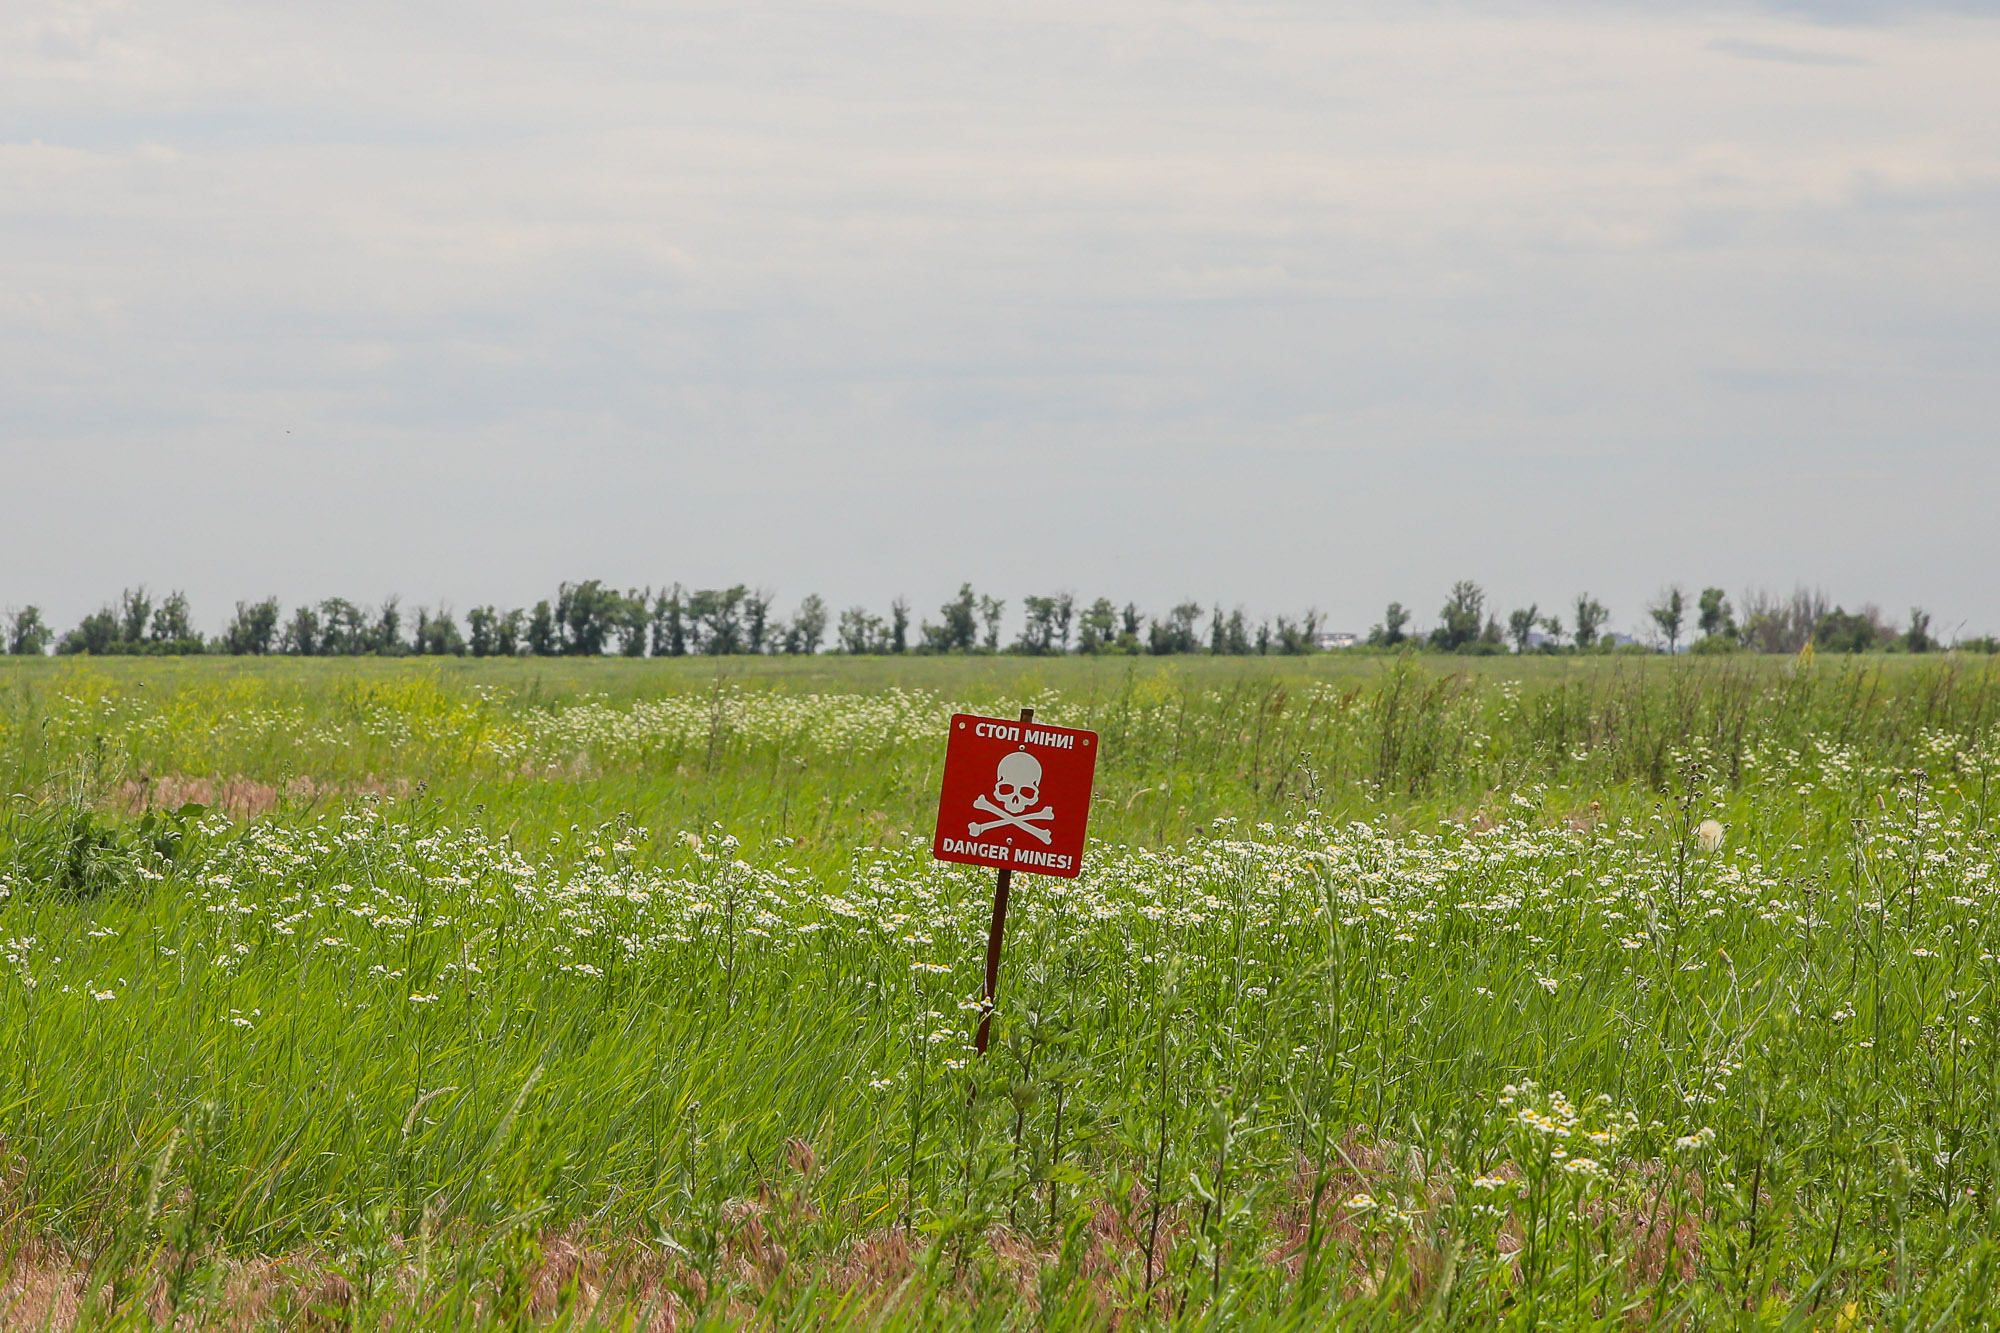 A &#8220;Danger Mines!&#8221; sign put at an anti-tank minefield just south of the city of Avdiyivka, eastern Ukraine, pictured on June 12, 2019.